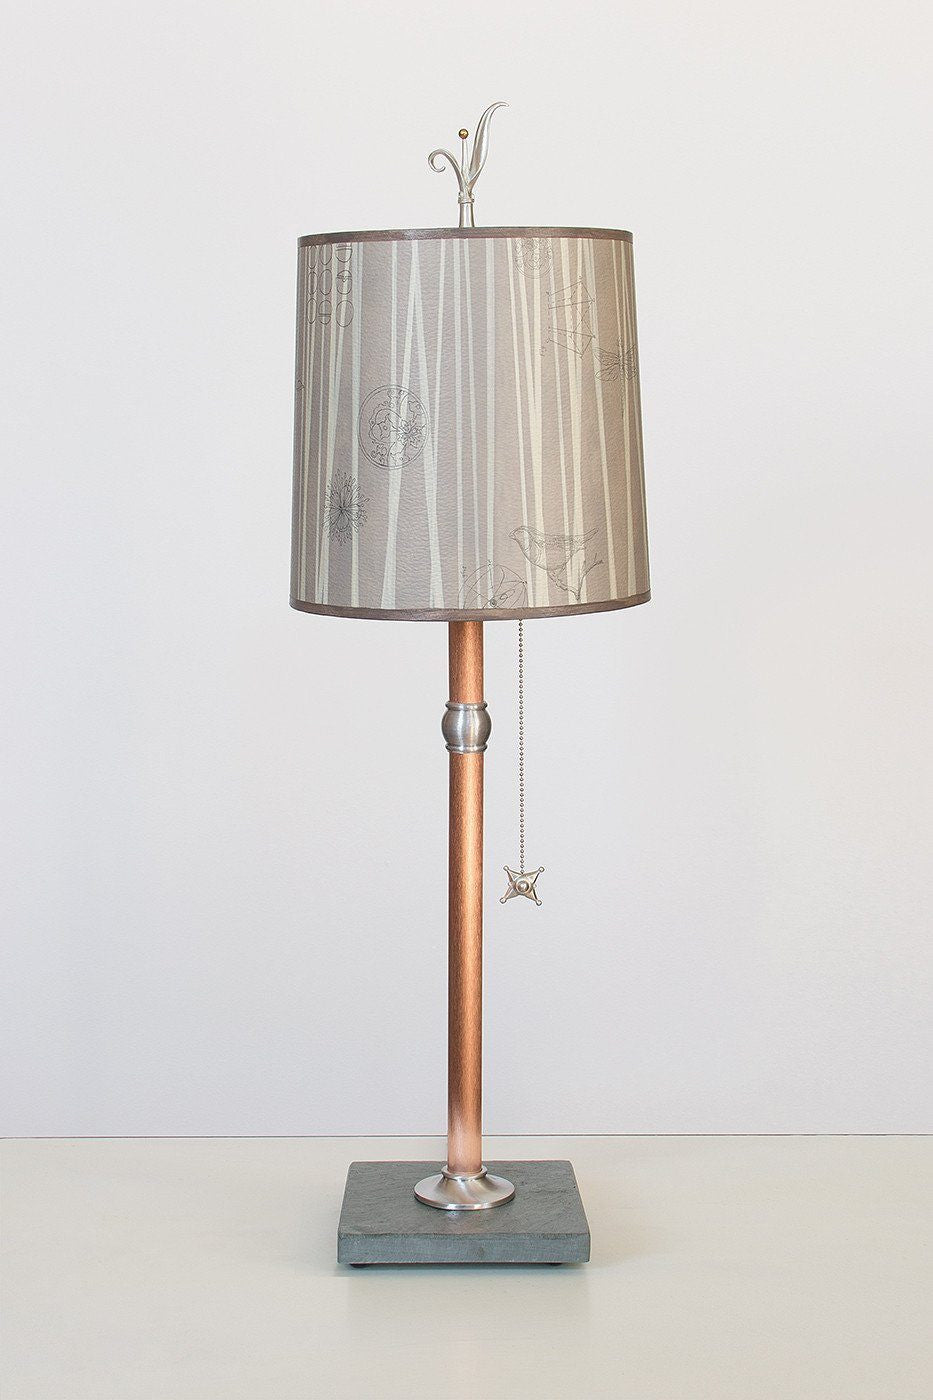 Janna Ugone &amp; Co Table Lamps Copper Table Lamp with Medium Drum Shade in Birch Lines